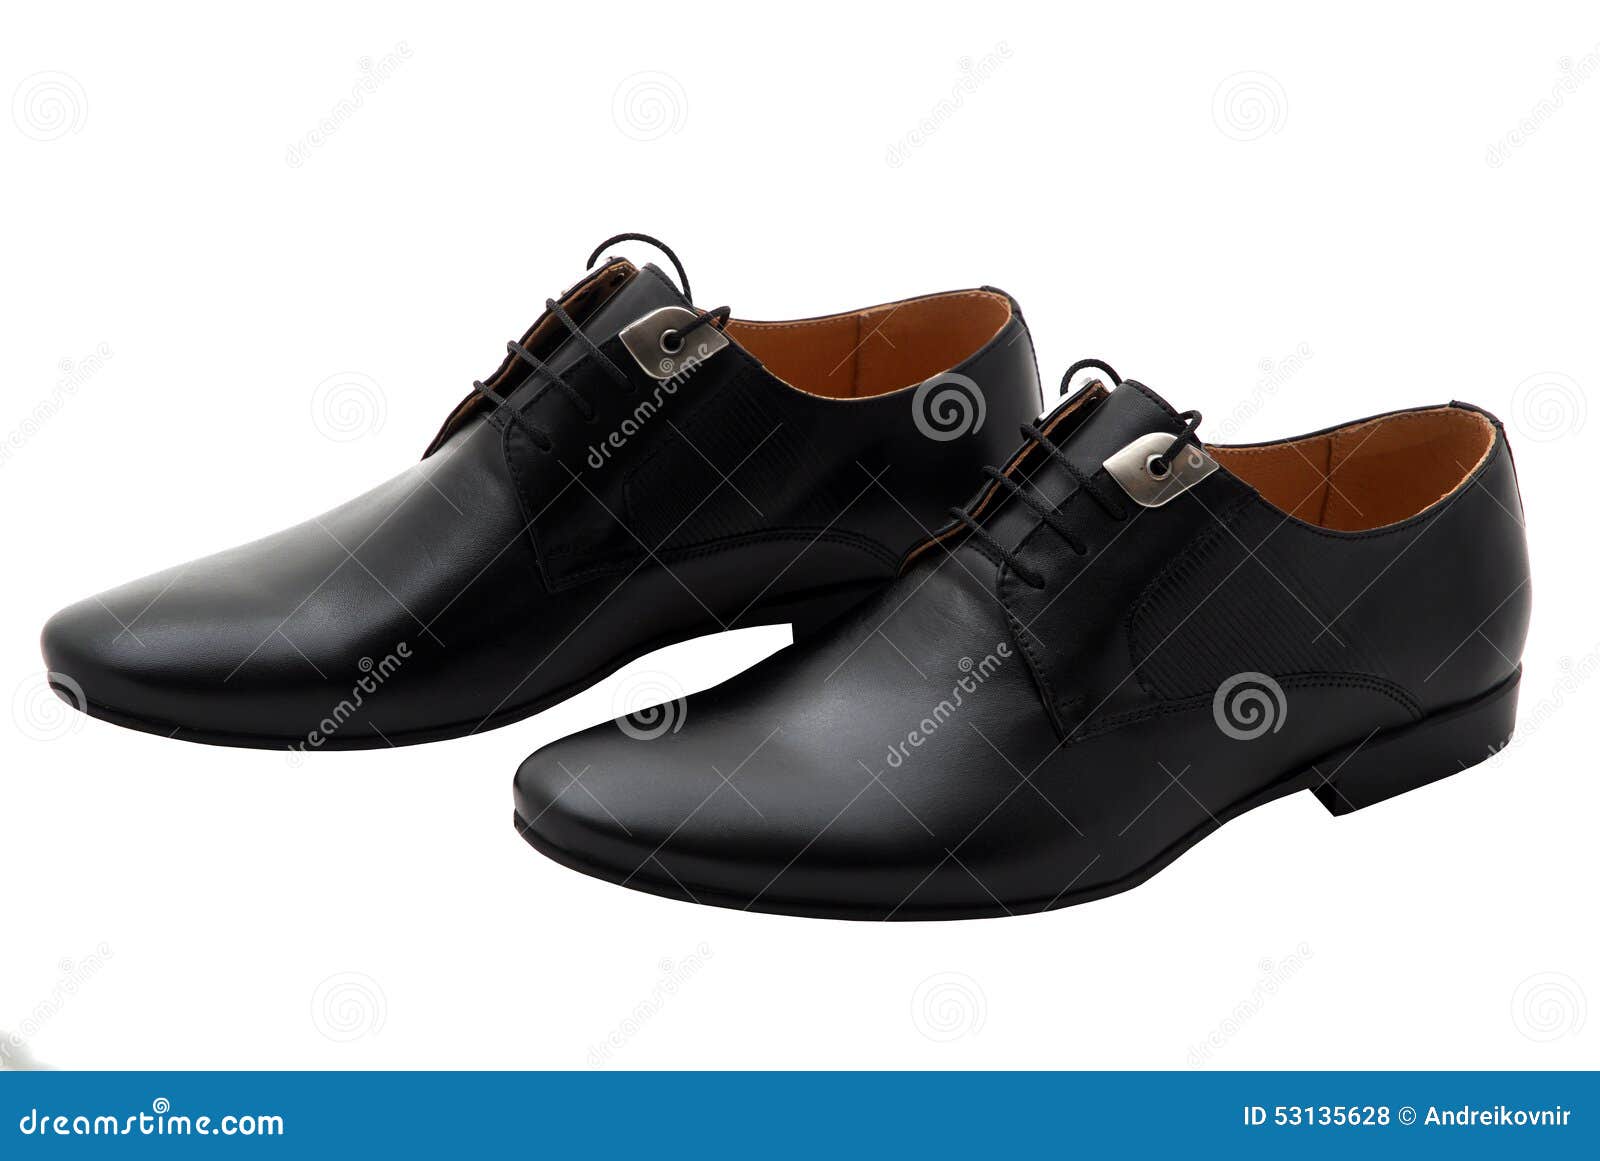 Classic Leather Men Shoes Isolated on White Stock Photo - Image of mens ...